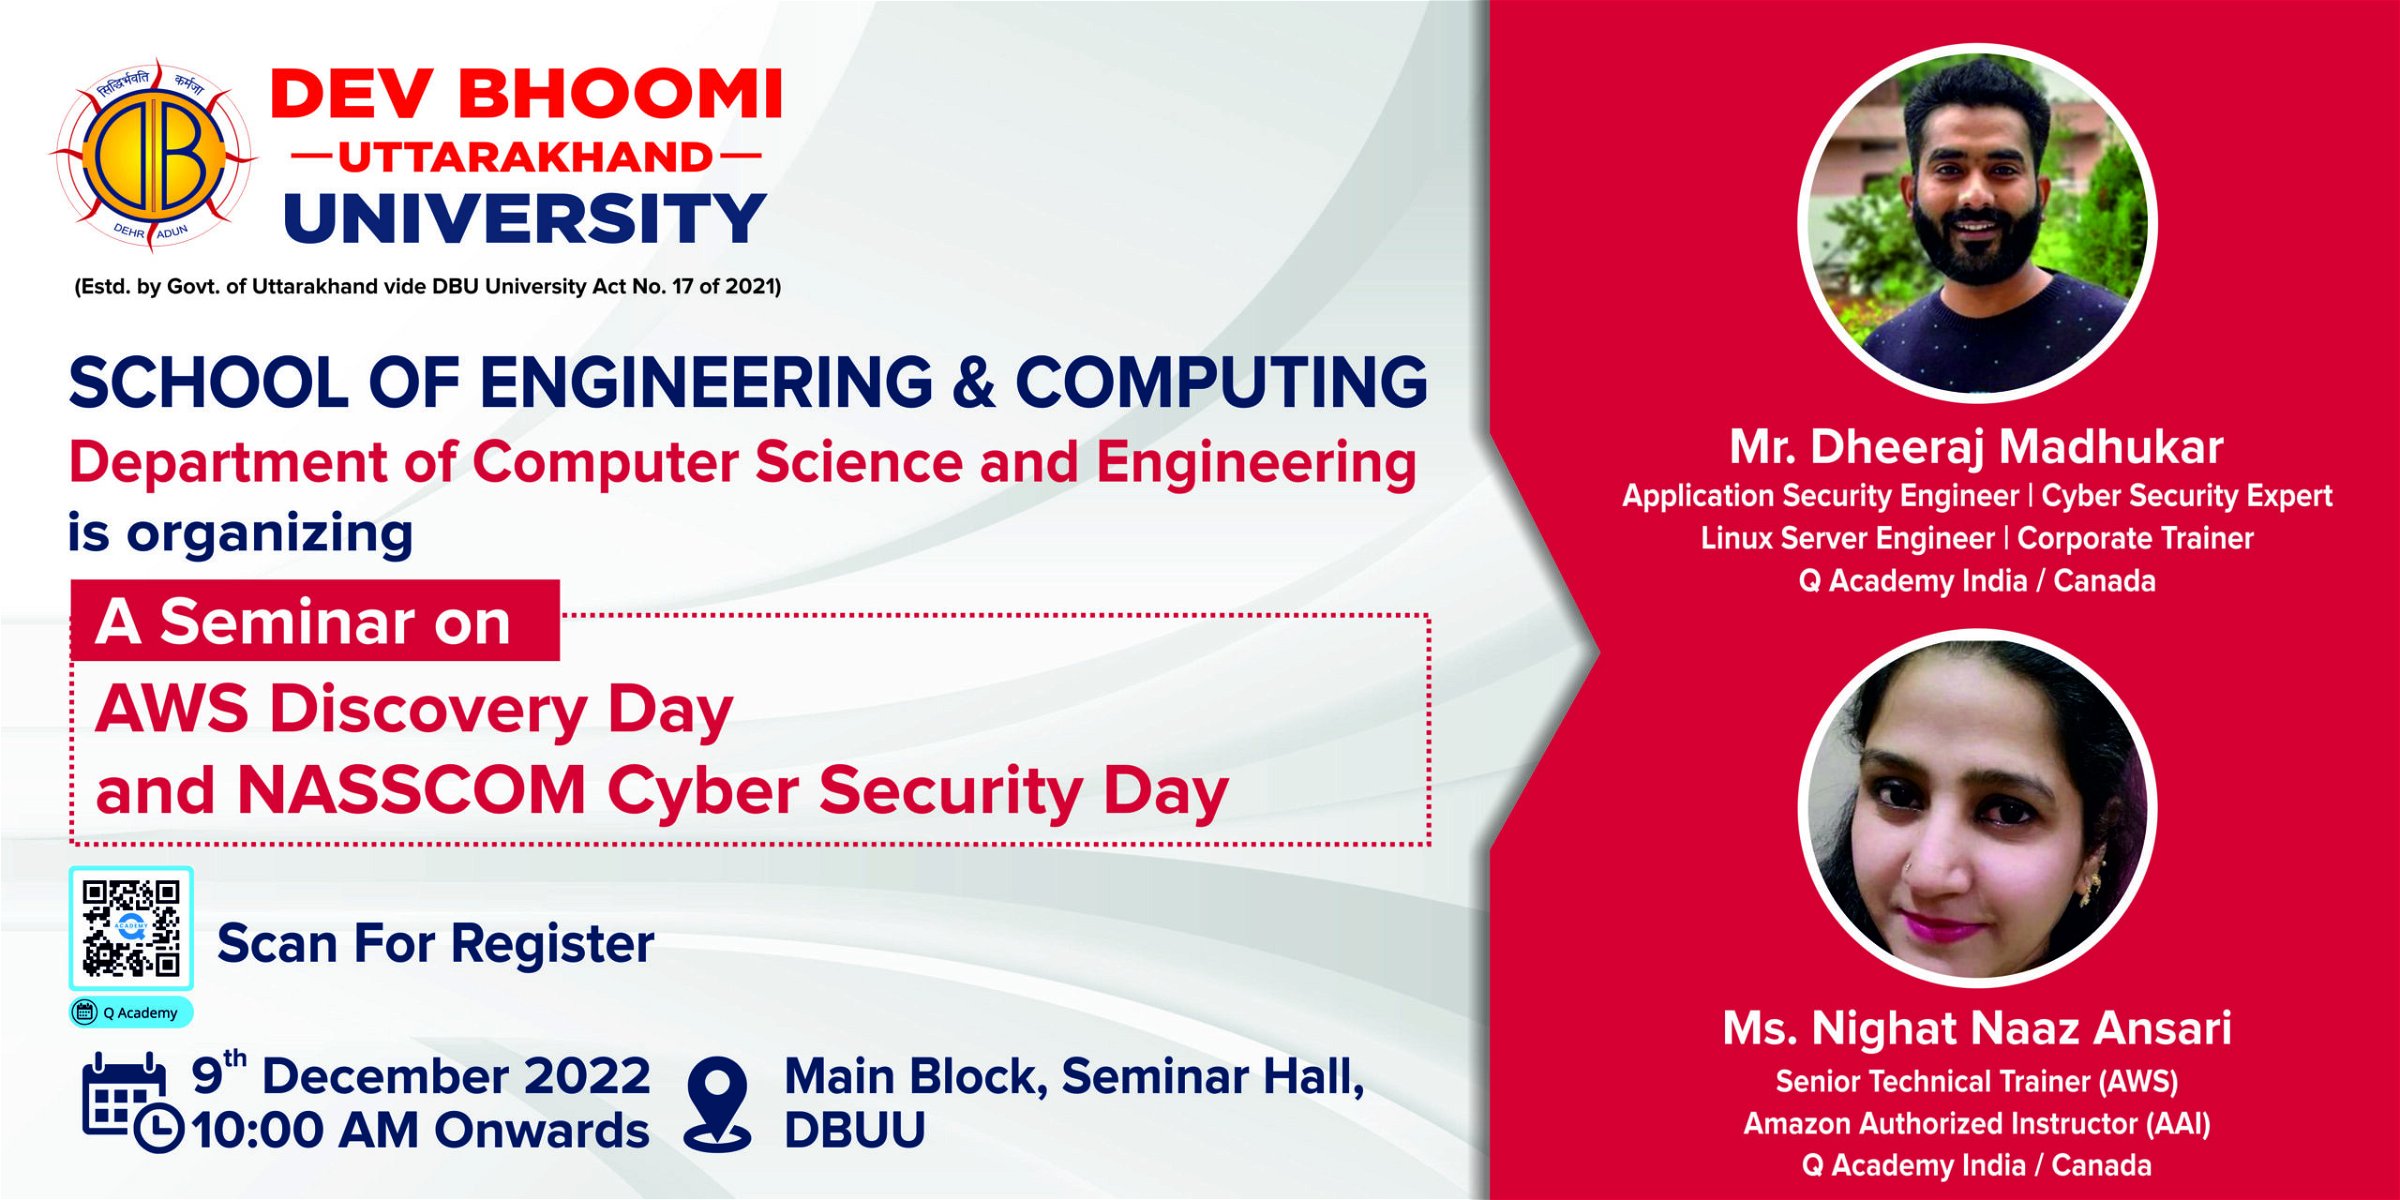 Seminar on AWS Discovery Day and NASSCOM Cyber Security Day